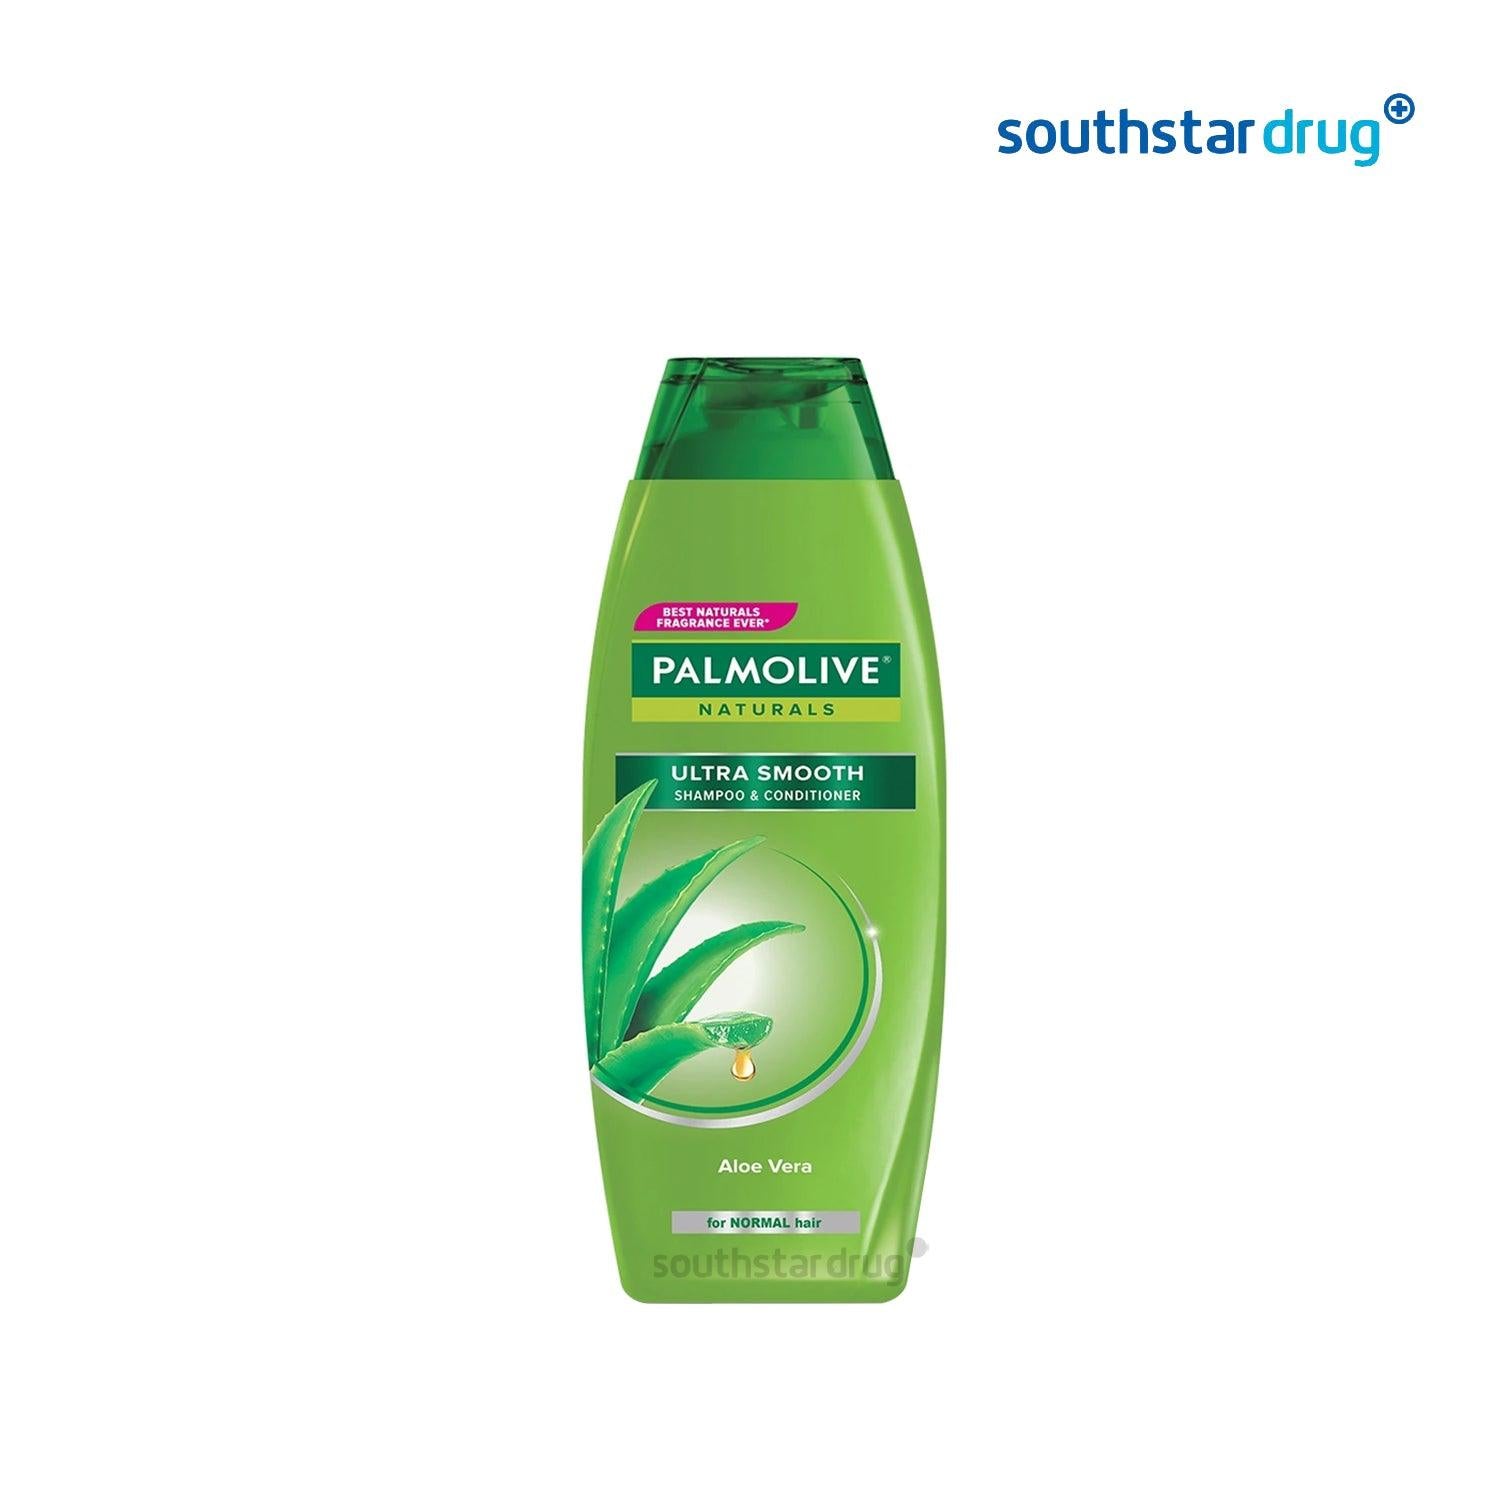 Palmolive Naturals Smooth Shampoo and Conditioner ml Online | Southstar